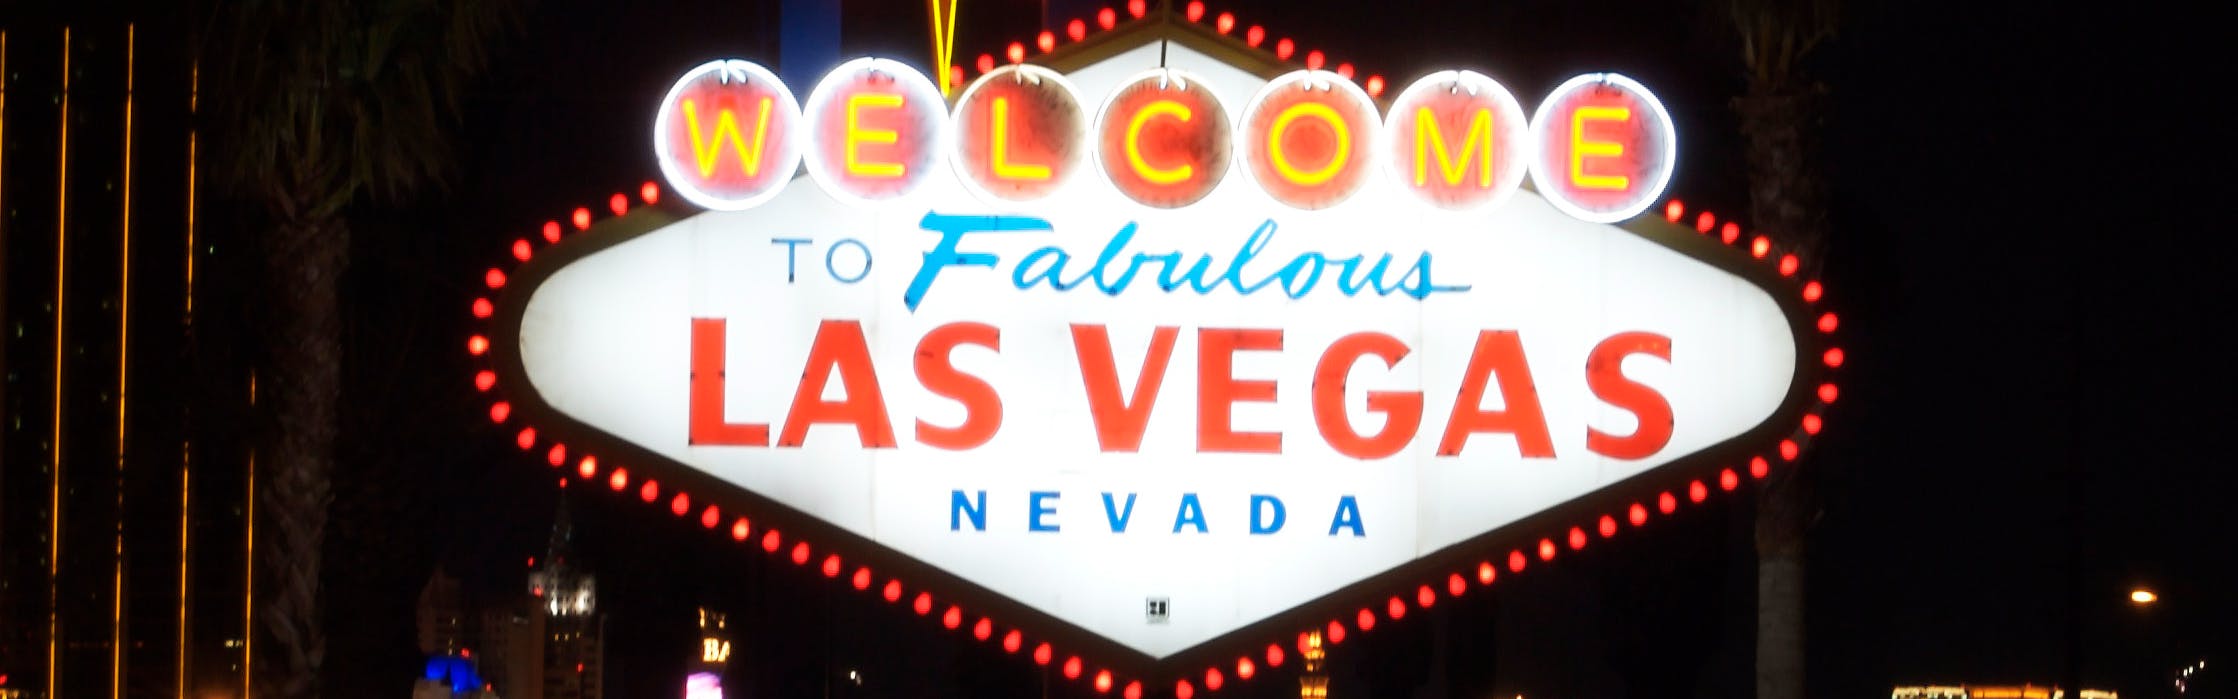 A lit up sign that reads "Welcome to Fabulous Las Vegas, Nevada". Behind the sign it is dark.